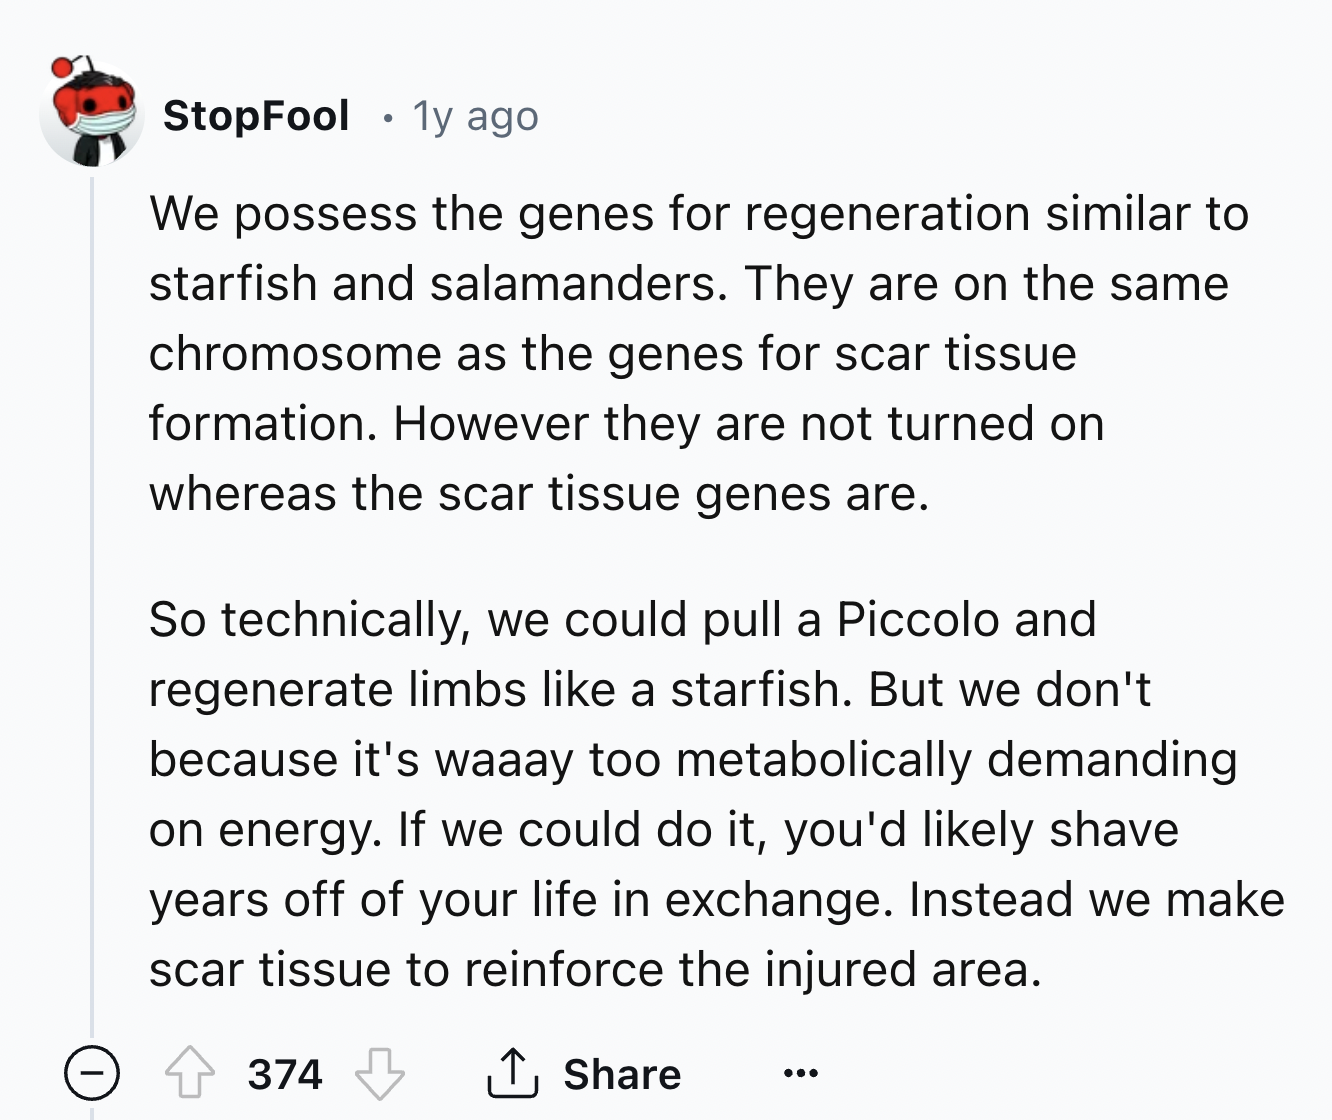 screenshot - StopFool 1y ago . We possess the genes for regeneration similar to starfish and salamanders. They are on the same chromosome as the genes for scar tissue formation. However they are not turned on whereas the scar tissue genes are. So technica